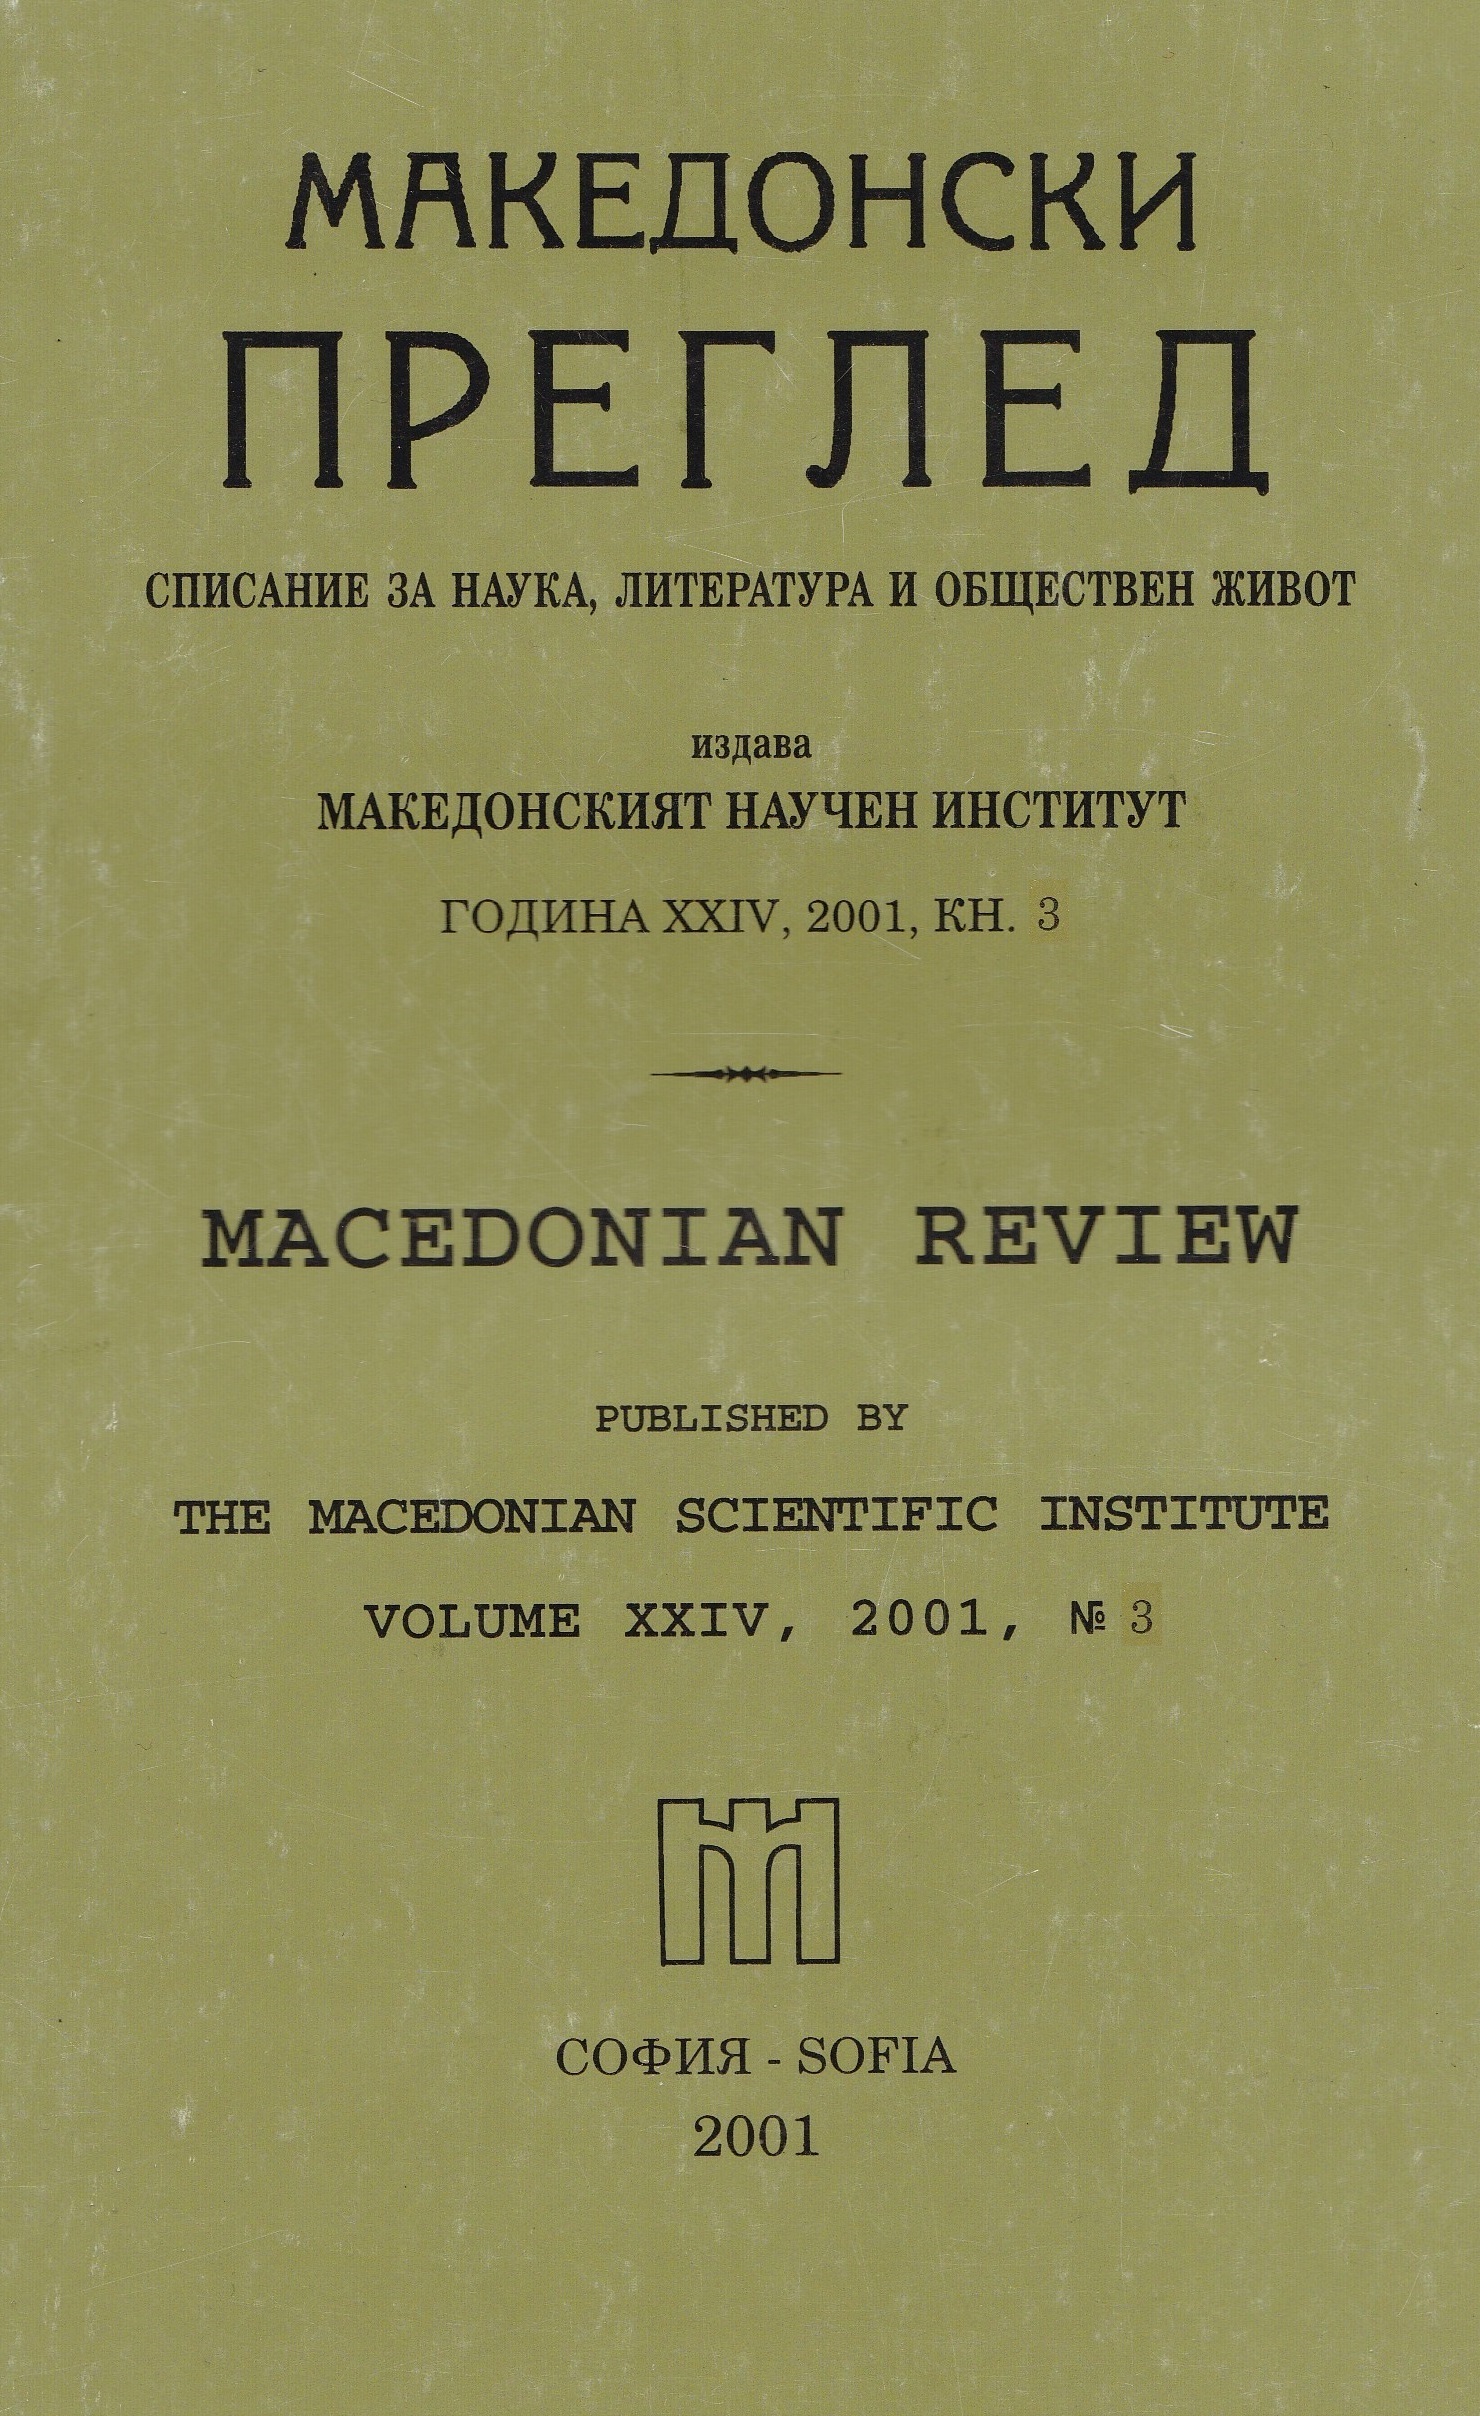 How to Make a Career under the Cover of Macedonism.Nadezhda Tsvetkovska. The Macedonian Question in the Yugoslavian Parliament between the Two World War I. Skopje, 2000, pp. 228. Cover Image